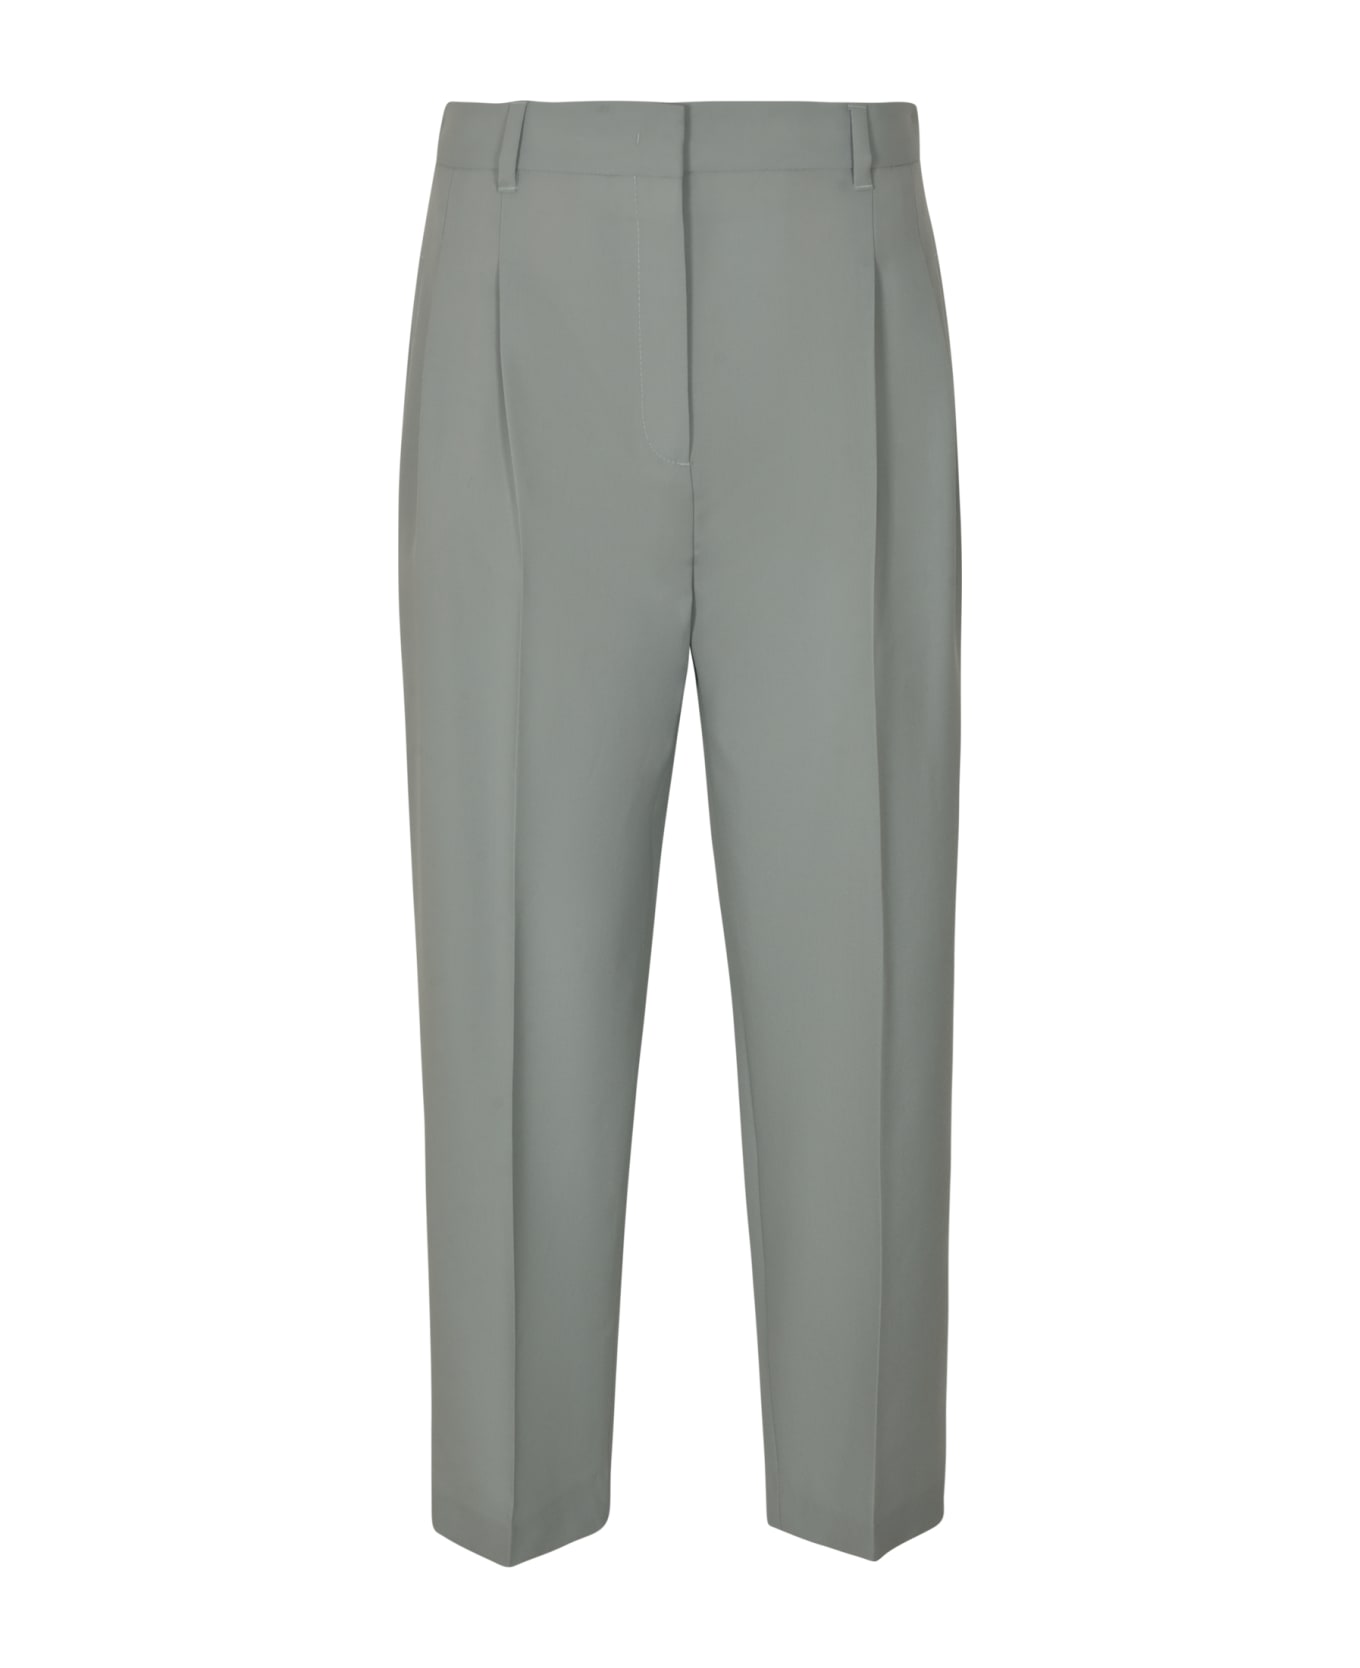 Paul Smith Pleat Effect Plain Cropped Trousers - Emerald